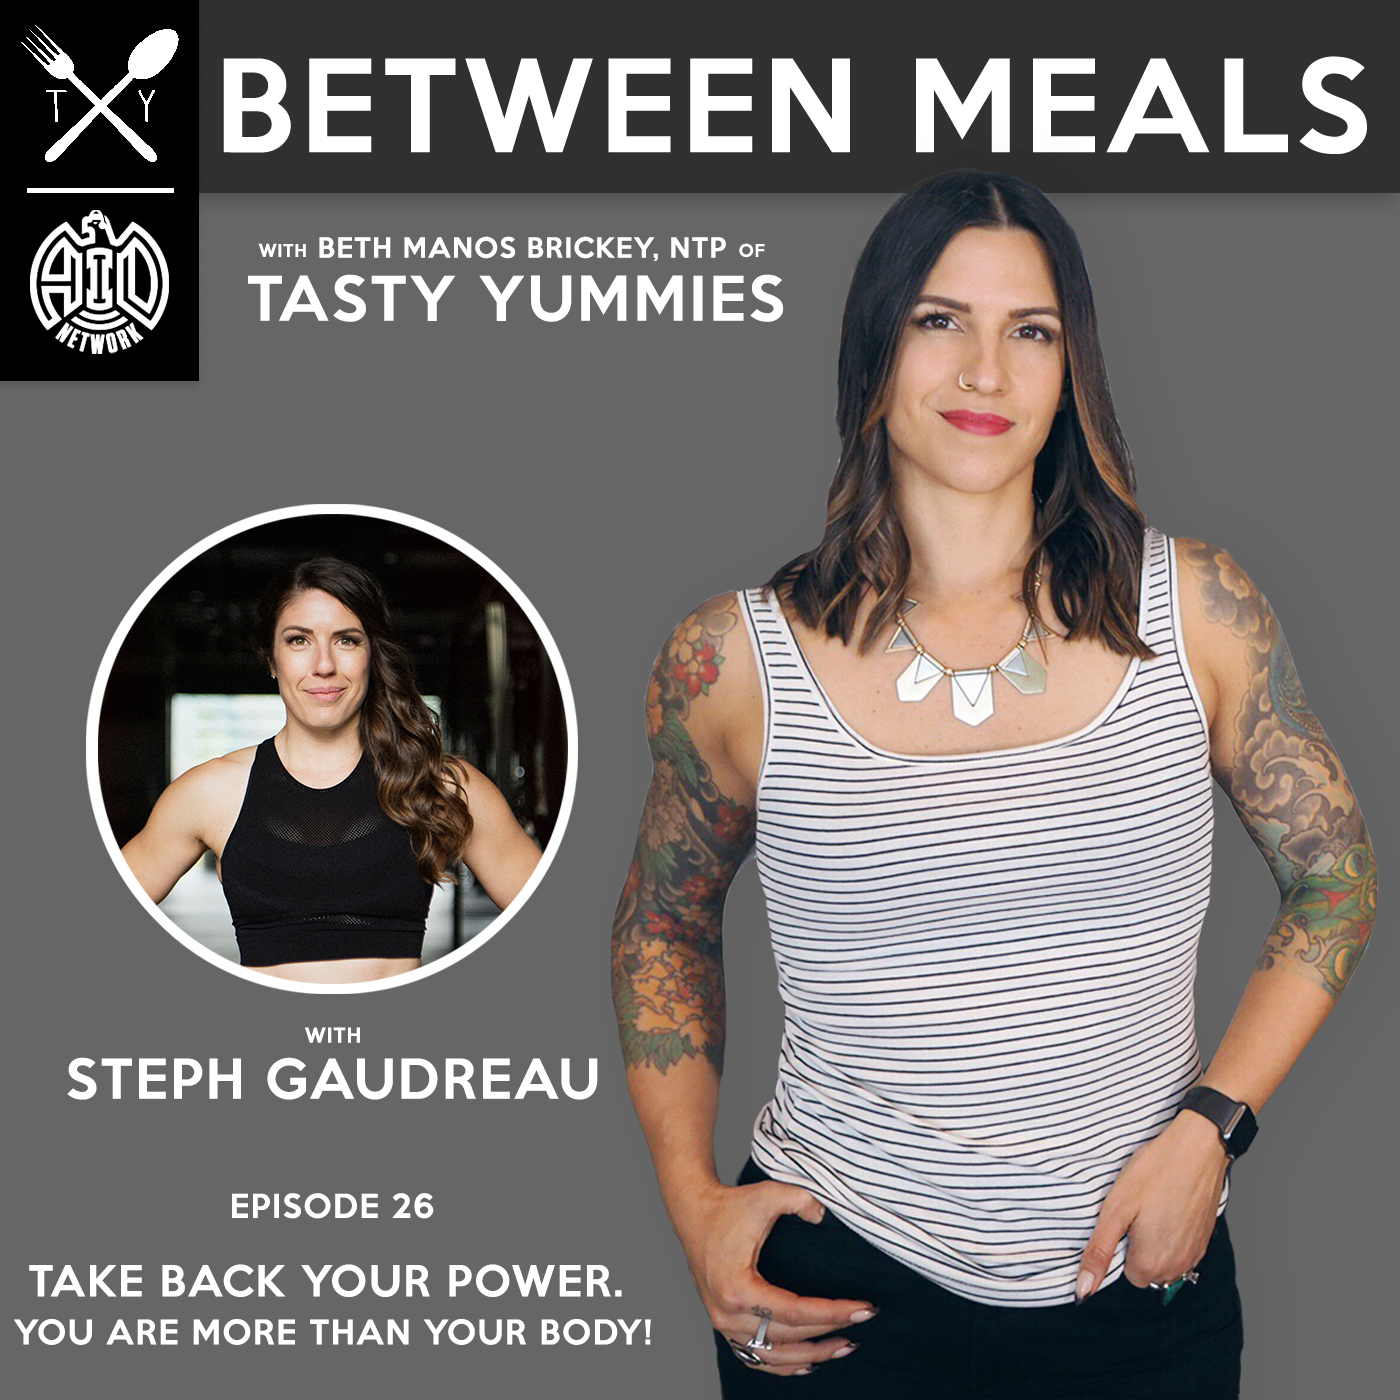 Between Meals Podcast. Episode 26: Take Back Your Power. You are More than Your Body! with Steph Gaudreau